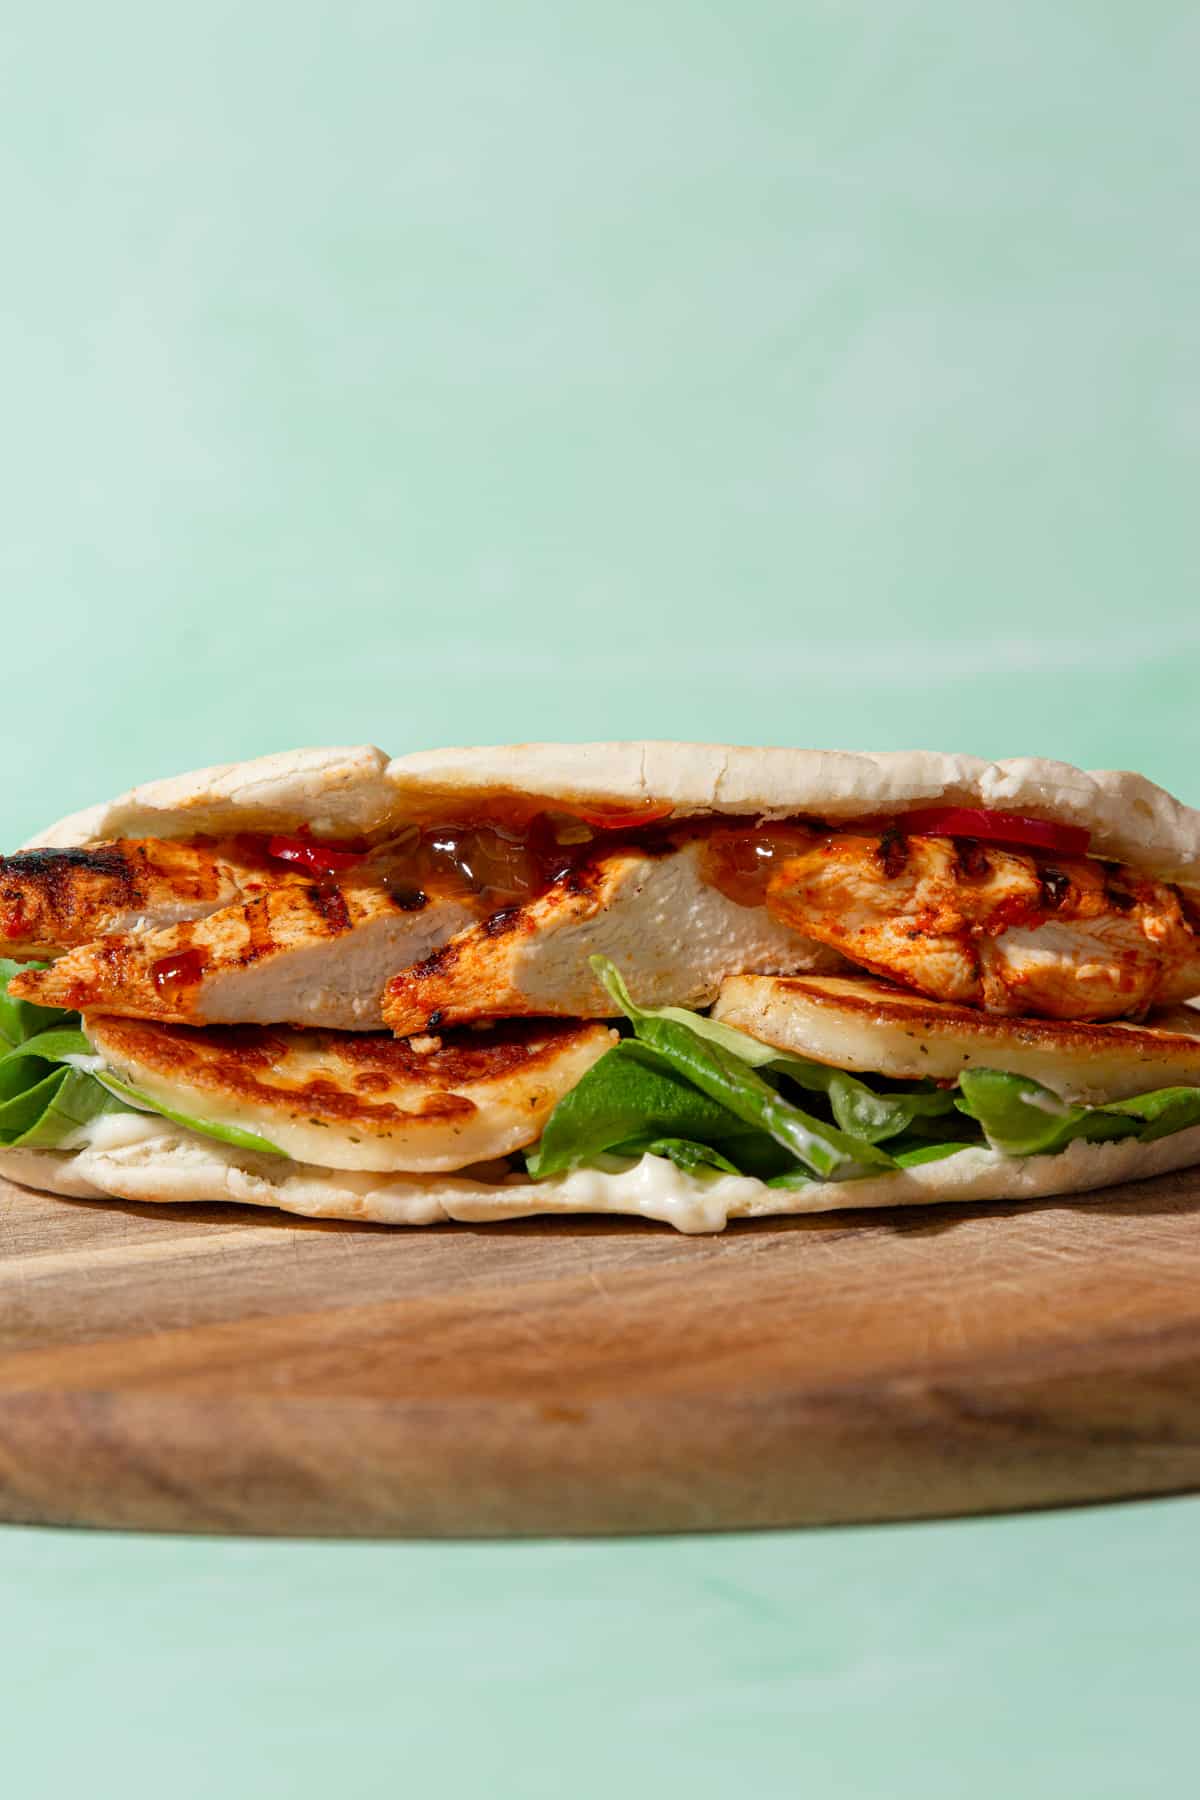 Side view of pitta filled with browned halloumi, lettuce, chicken, mayo and relish.